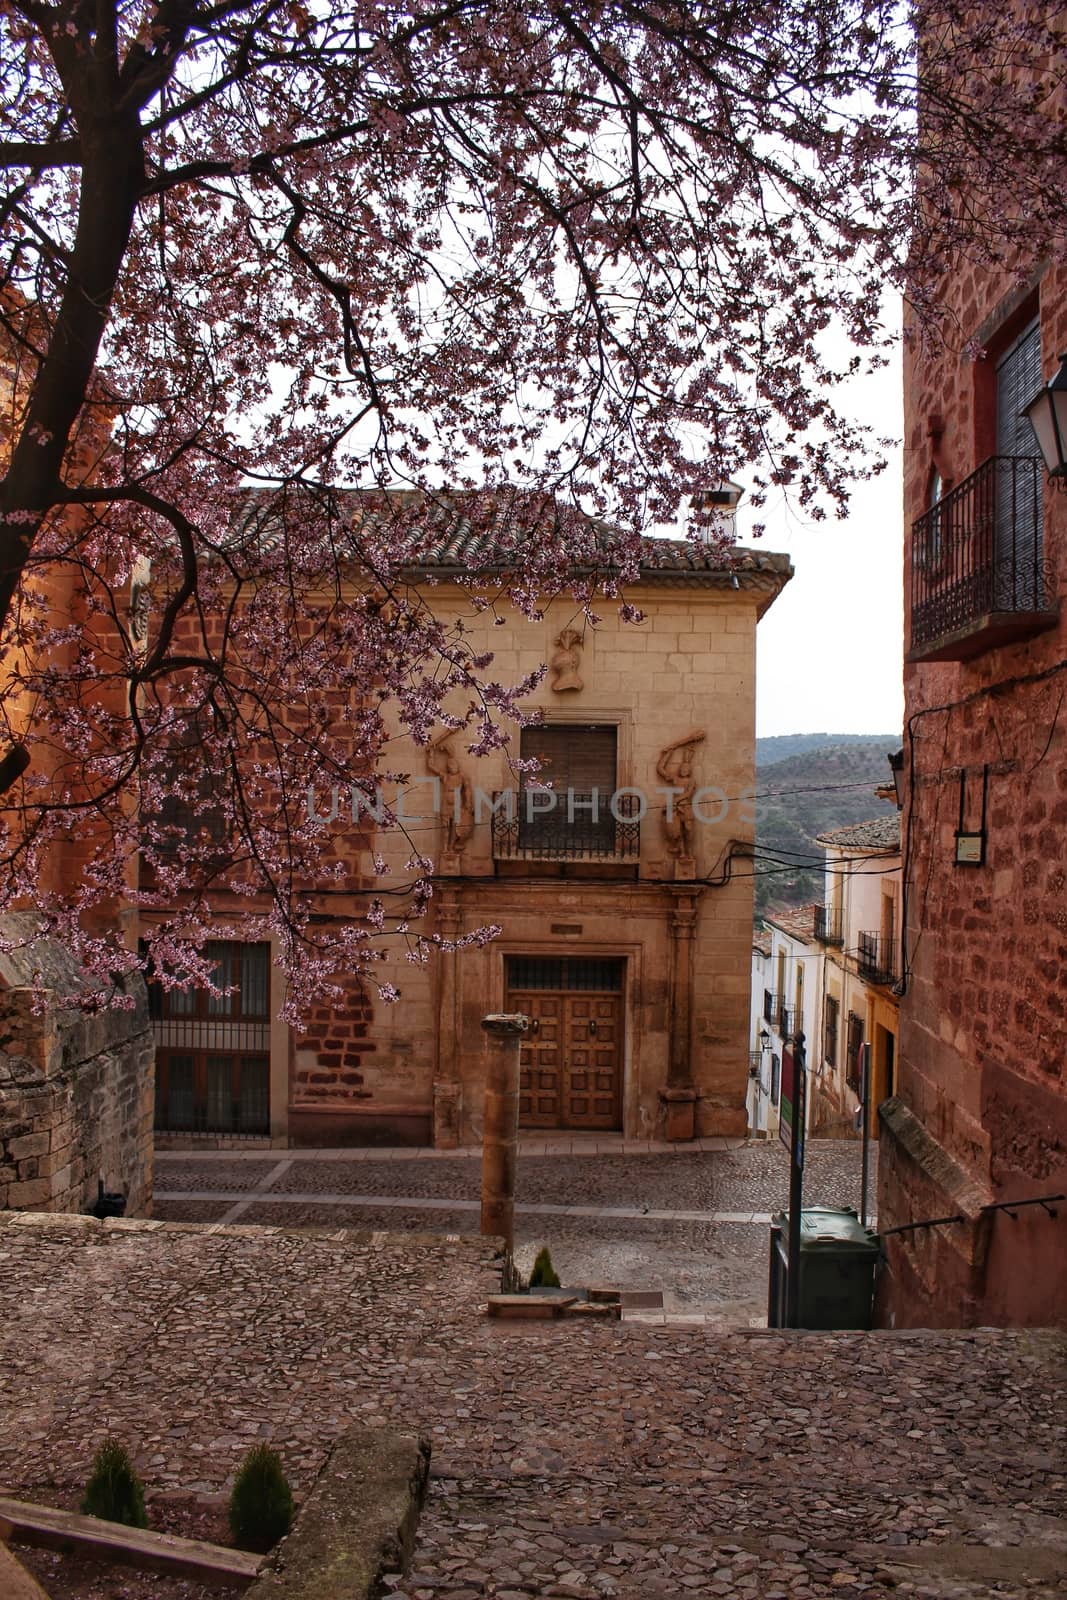 Beautiful pink cherry tree in bloom in a town square in Alcaraz in spring. Old and antique facades and stone stairs in foreground